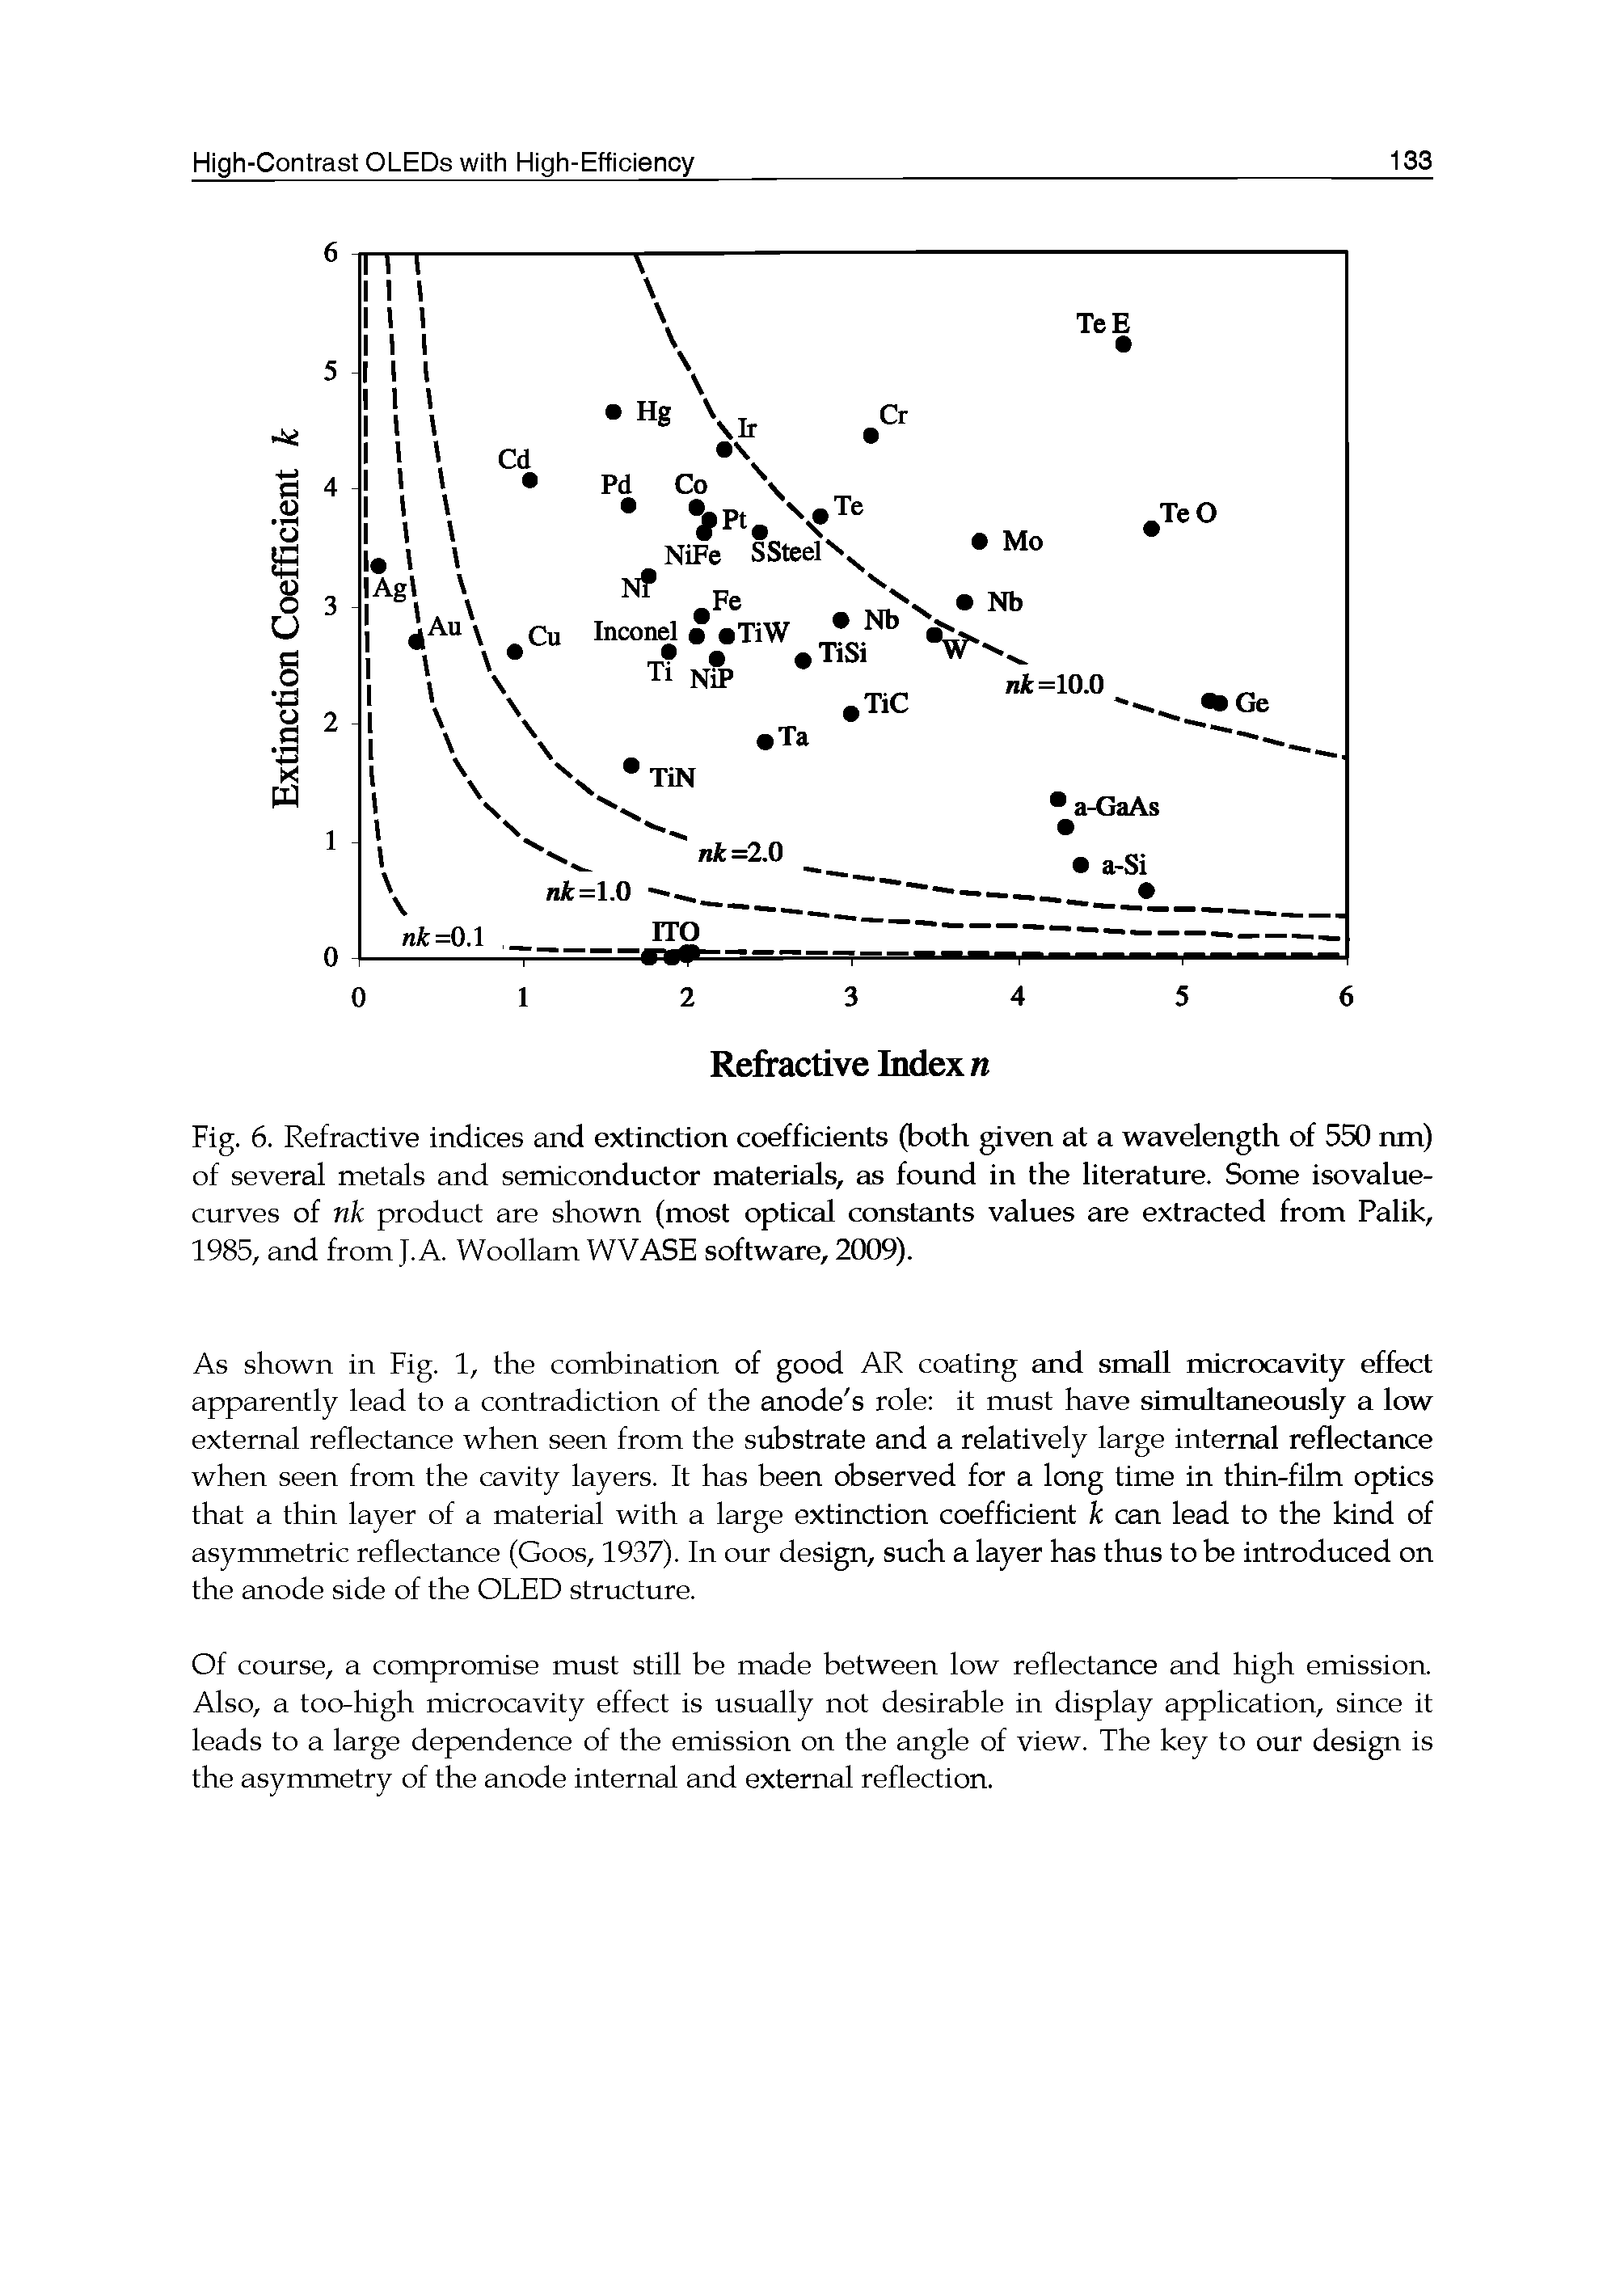 Fig. 6. Refractive indices and extinction coefficients (both given at a wavelength of 550 ran) of several metals and semiconductor materials, as found in the literature. Some isovalue-curves of nk product are shown (most optical constants values are extracted from Palik, 1985, and from J. A. Woollam WVASE software, 2009).